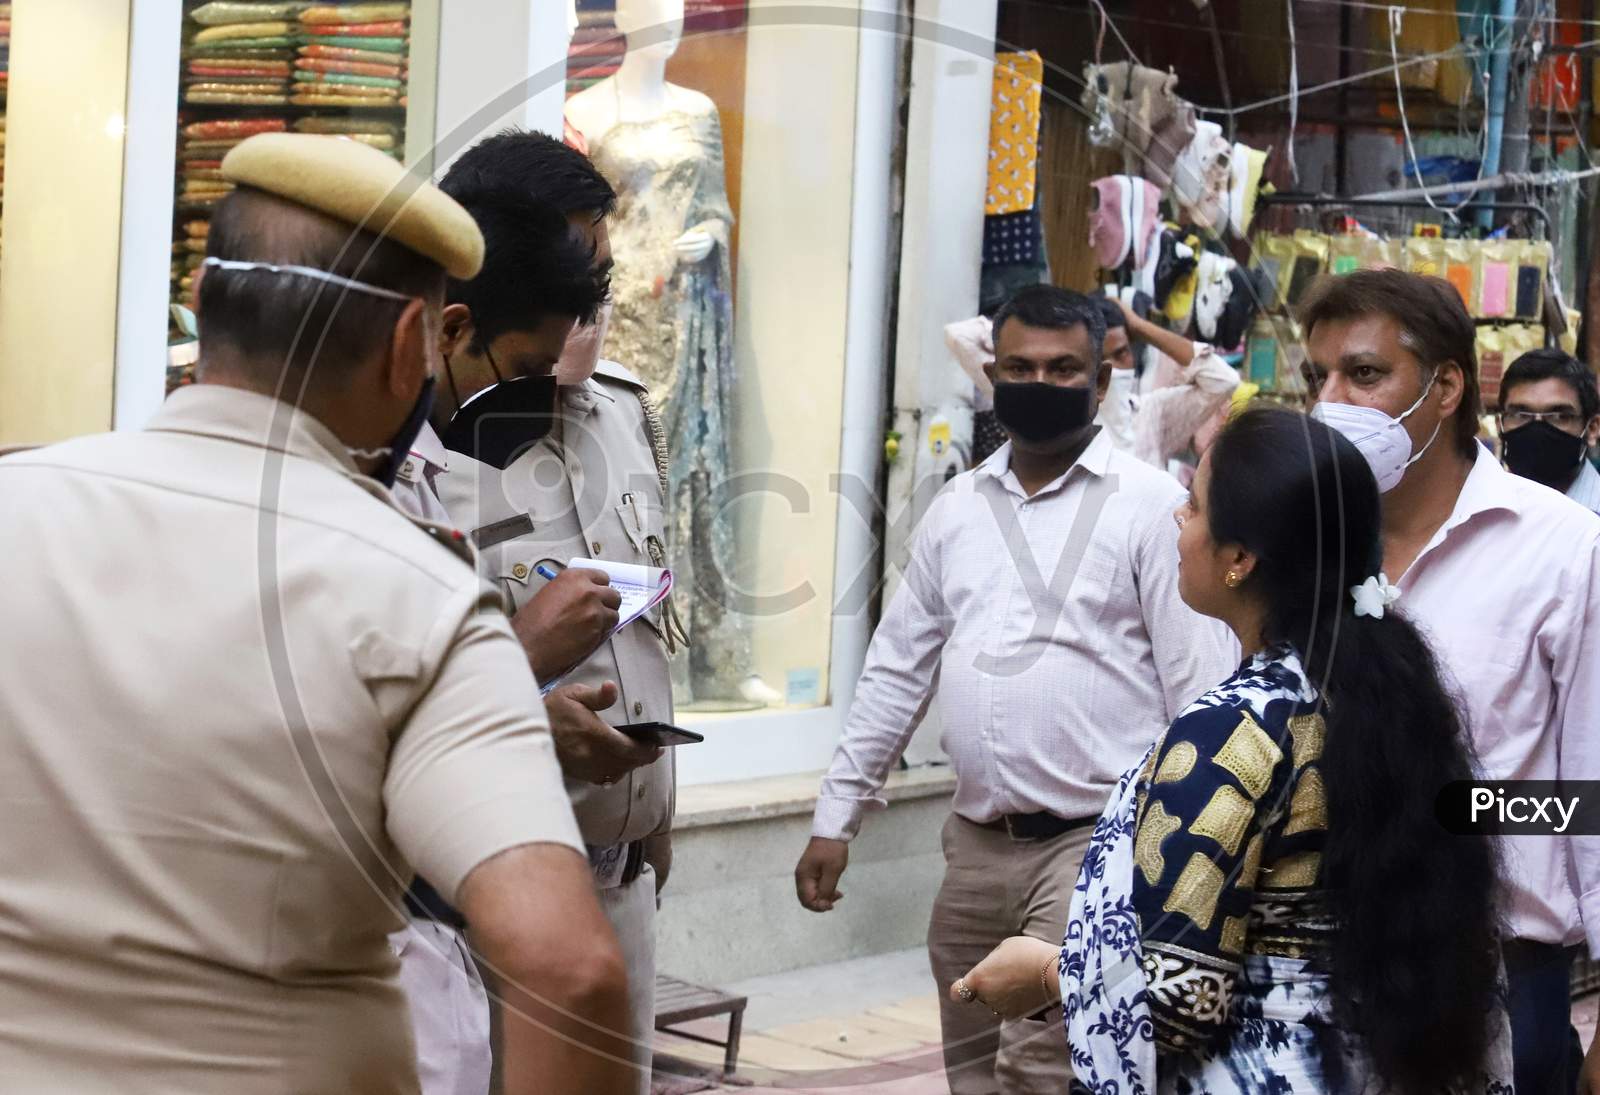 Delhi Police fines people for violation of lockdown measures for not wearing face masks, at Lajpath Nagar market, On June 20, 2020 In New Delhi, India.